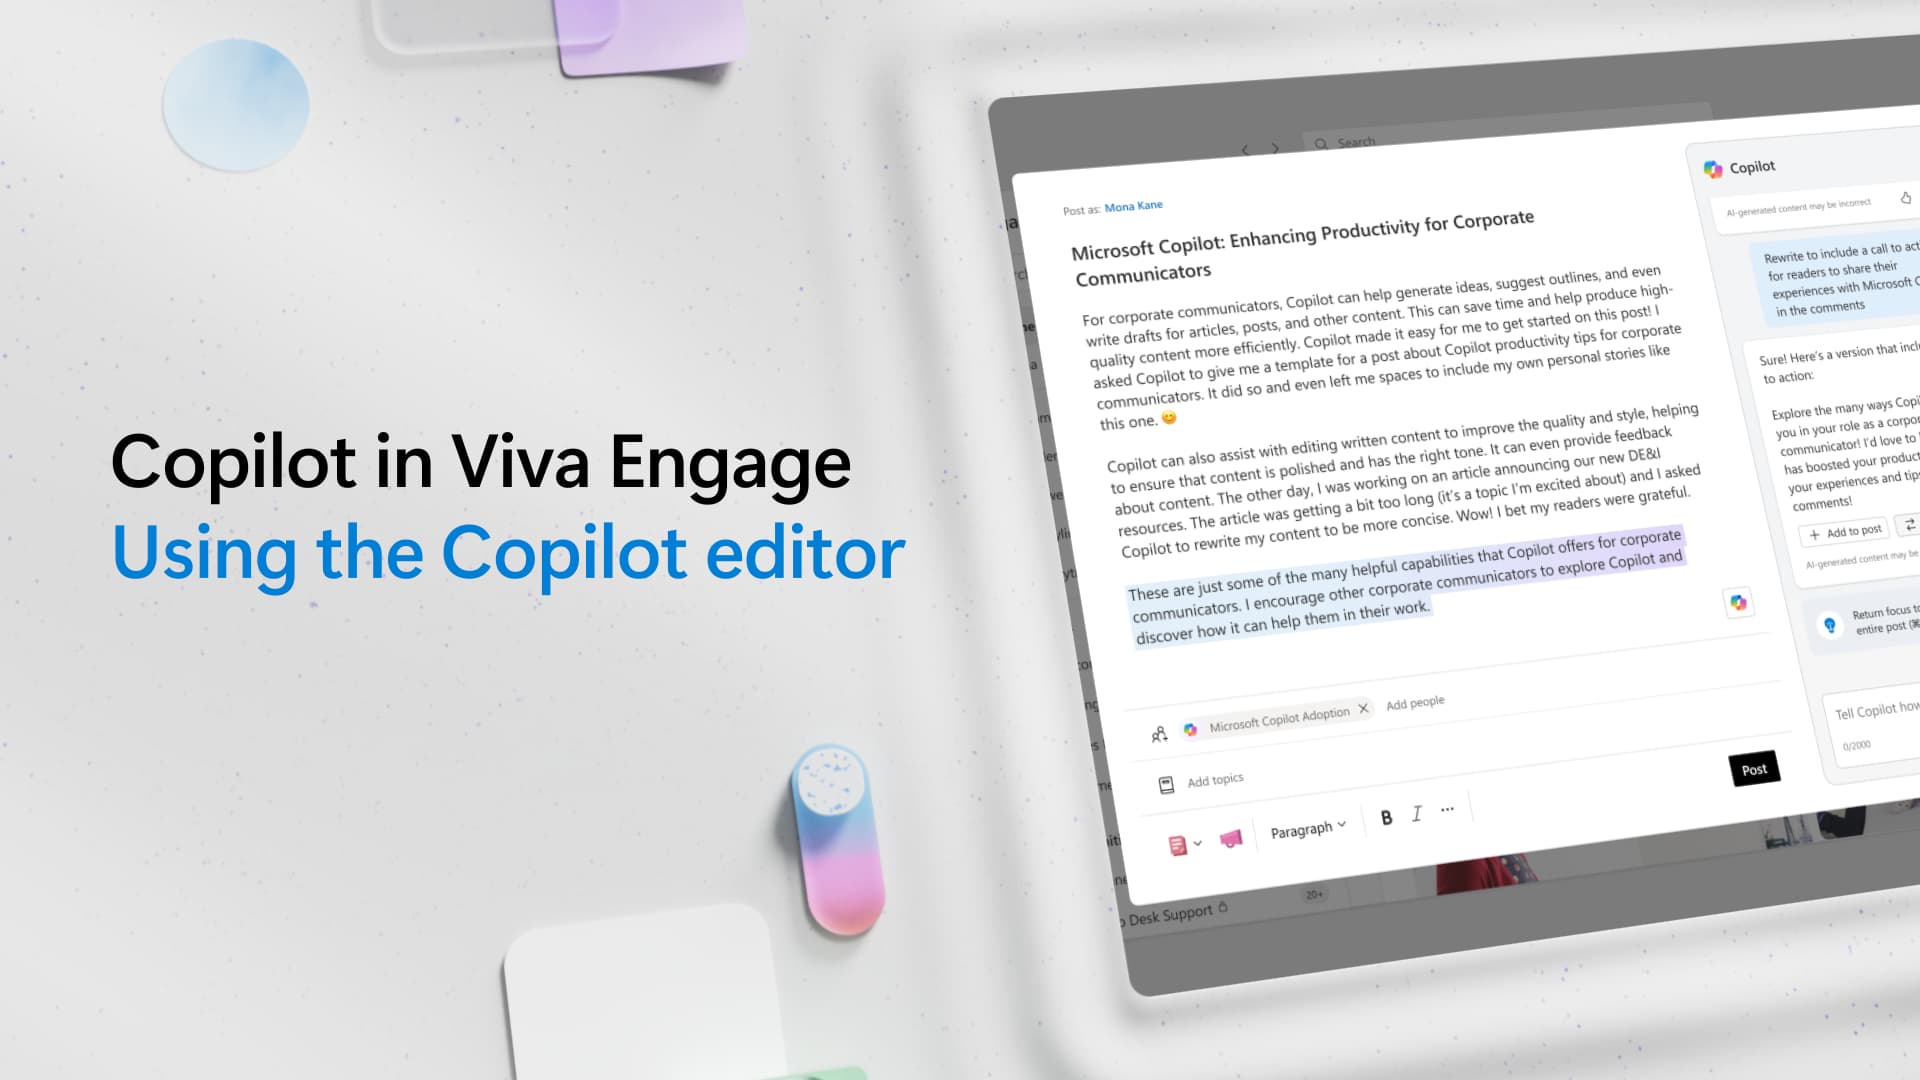 Video: Using the Copilot editor in Viva Engage